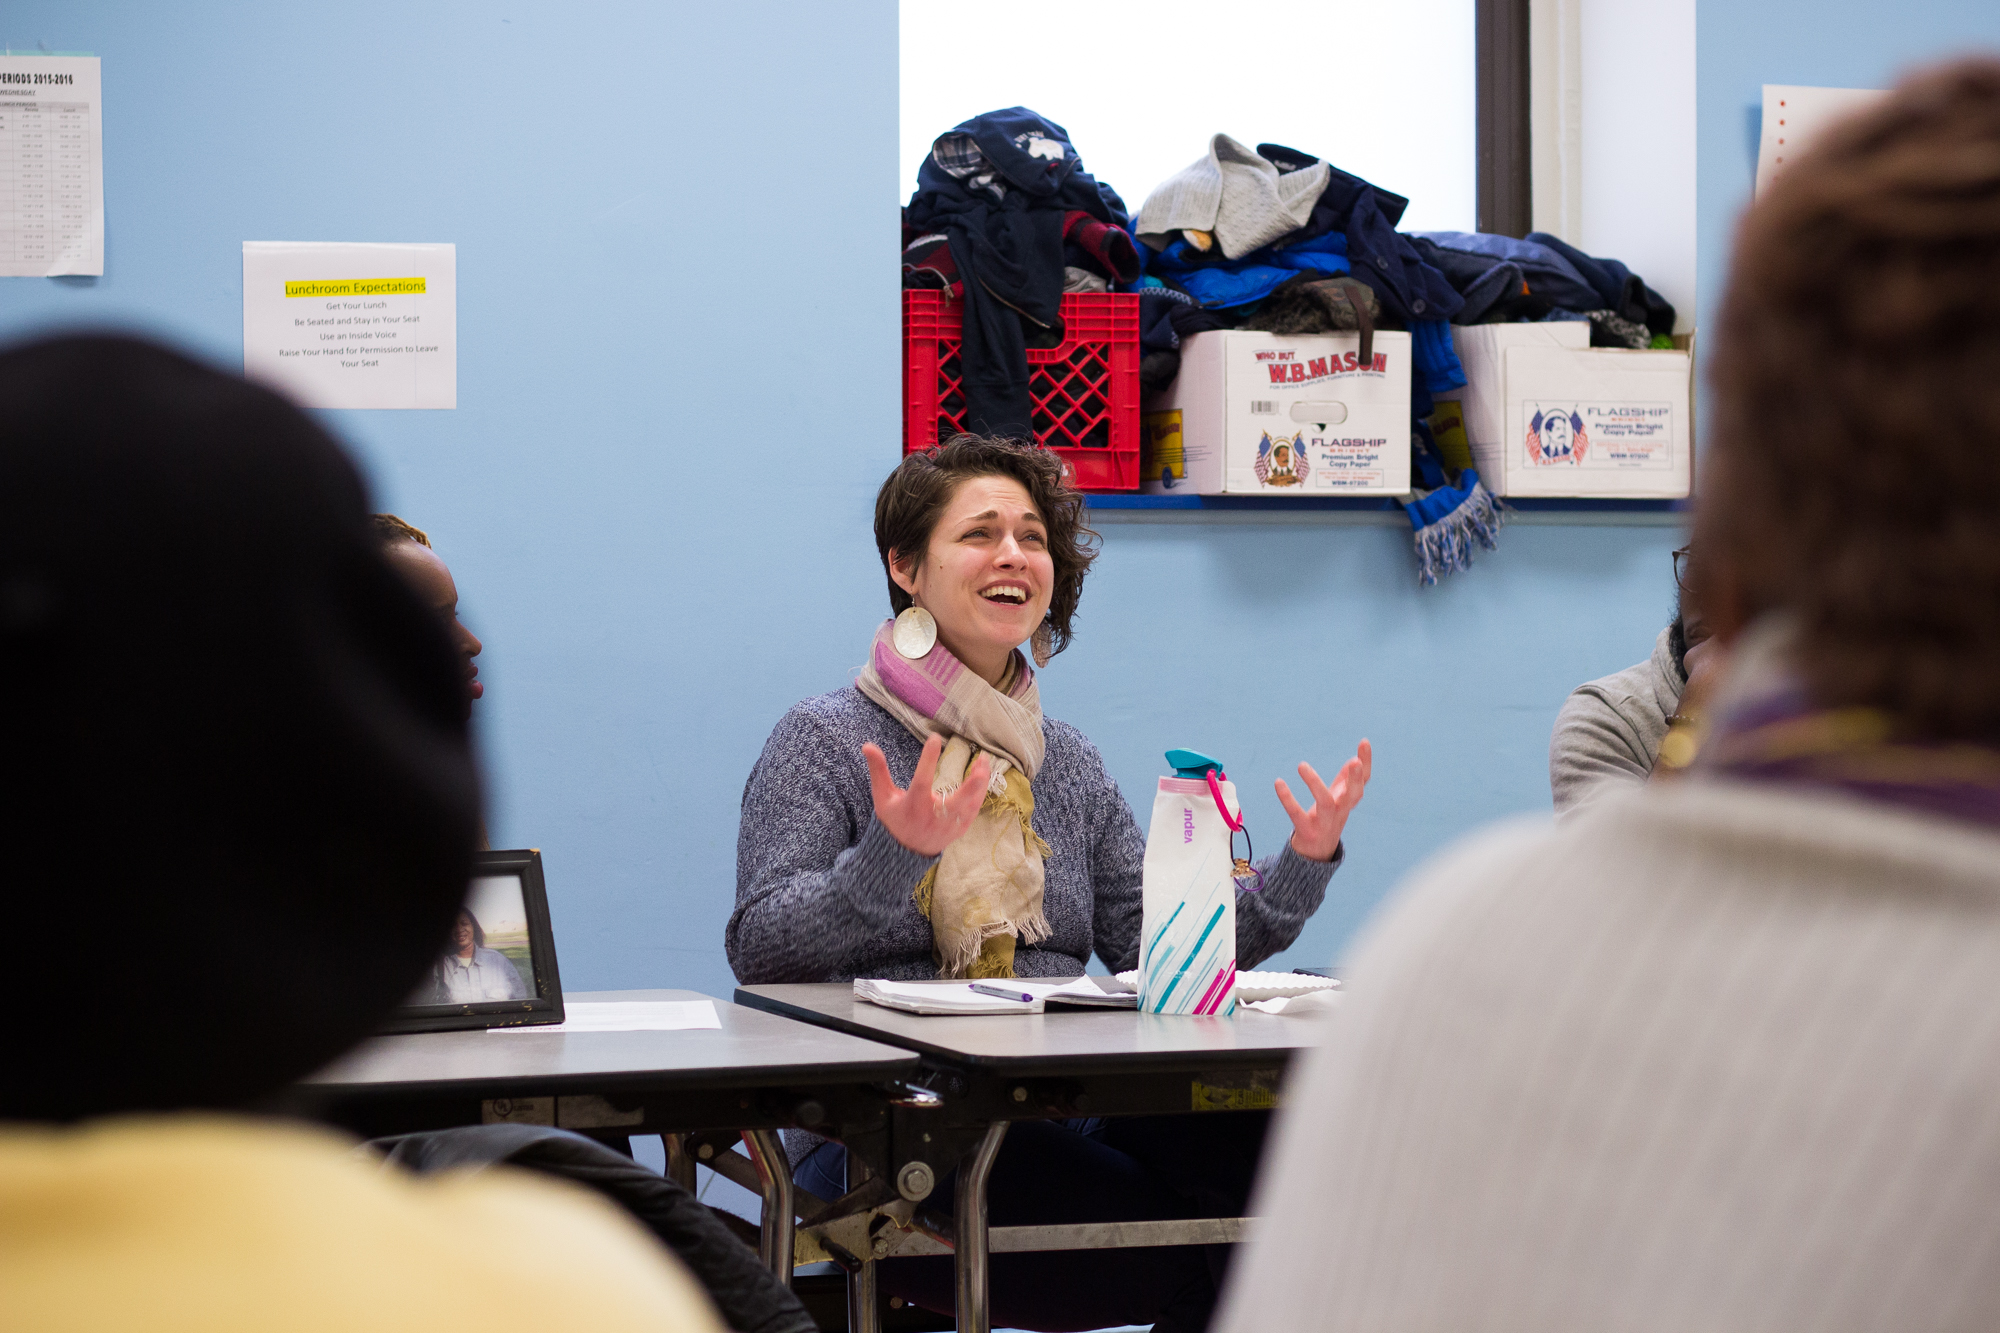  Point Breeze resident Amelia Longo, 32, shares her story during the second session of The Redline Project,&nbsp;held at Independence Charter School in Philadelphia February 6, 2016.&nbsp;  "It’s been almost two years since I moved here. I’ve gotten 